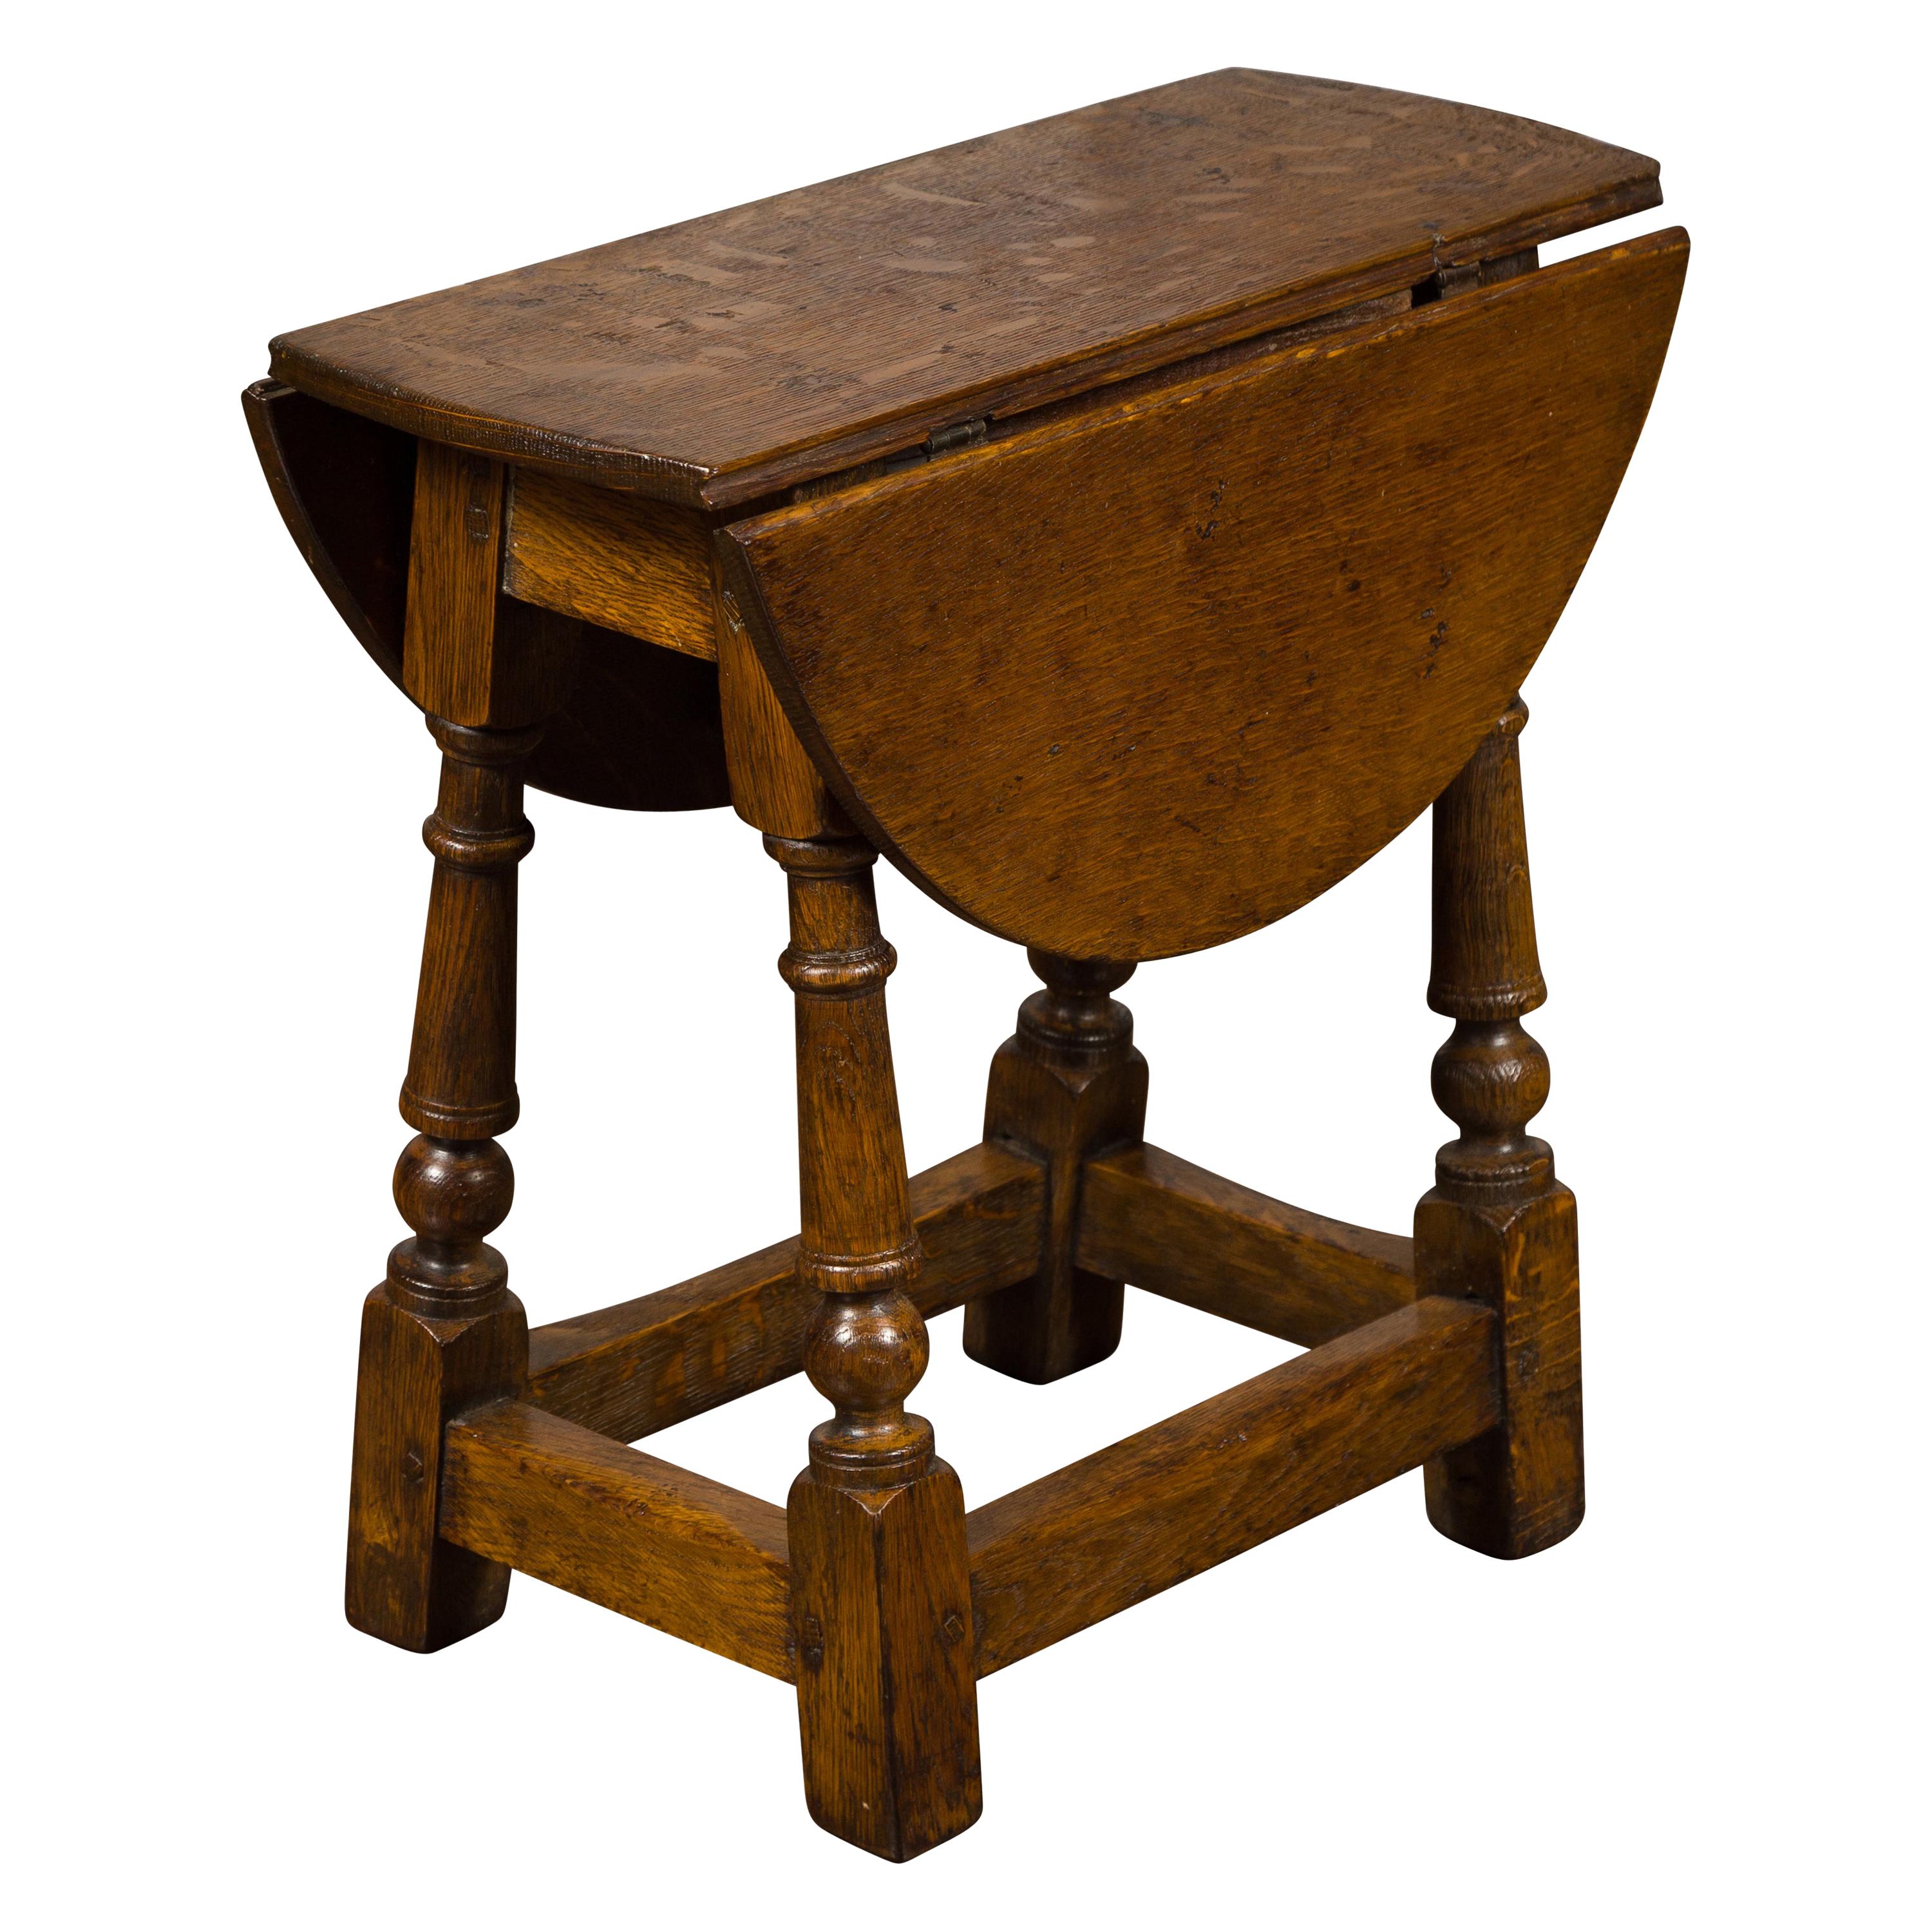 Small English 1880 Oak Drop-Leaf Side Table with Turned Legs and Side Stretchers